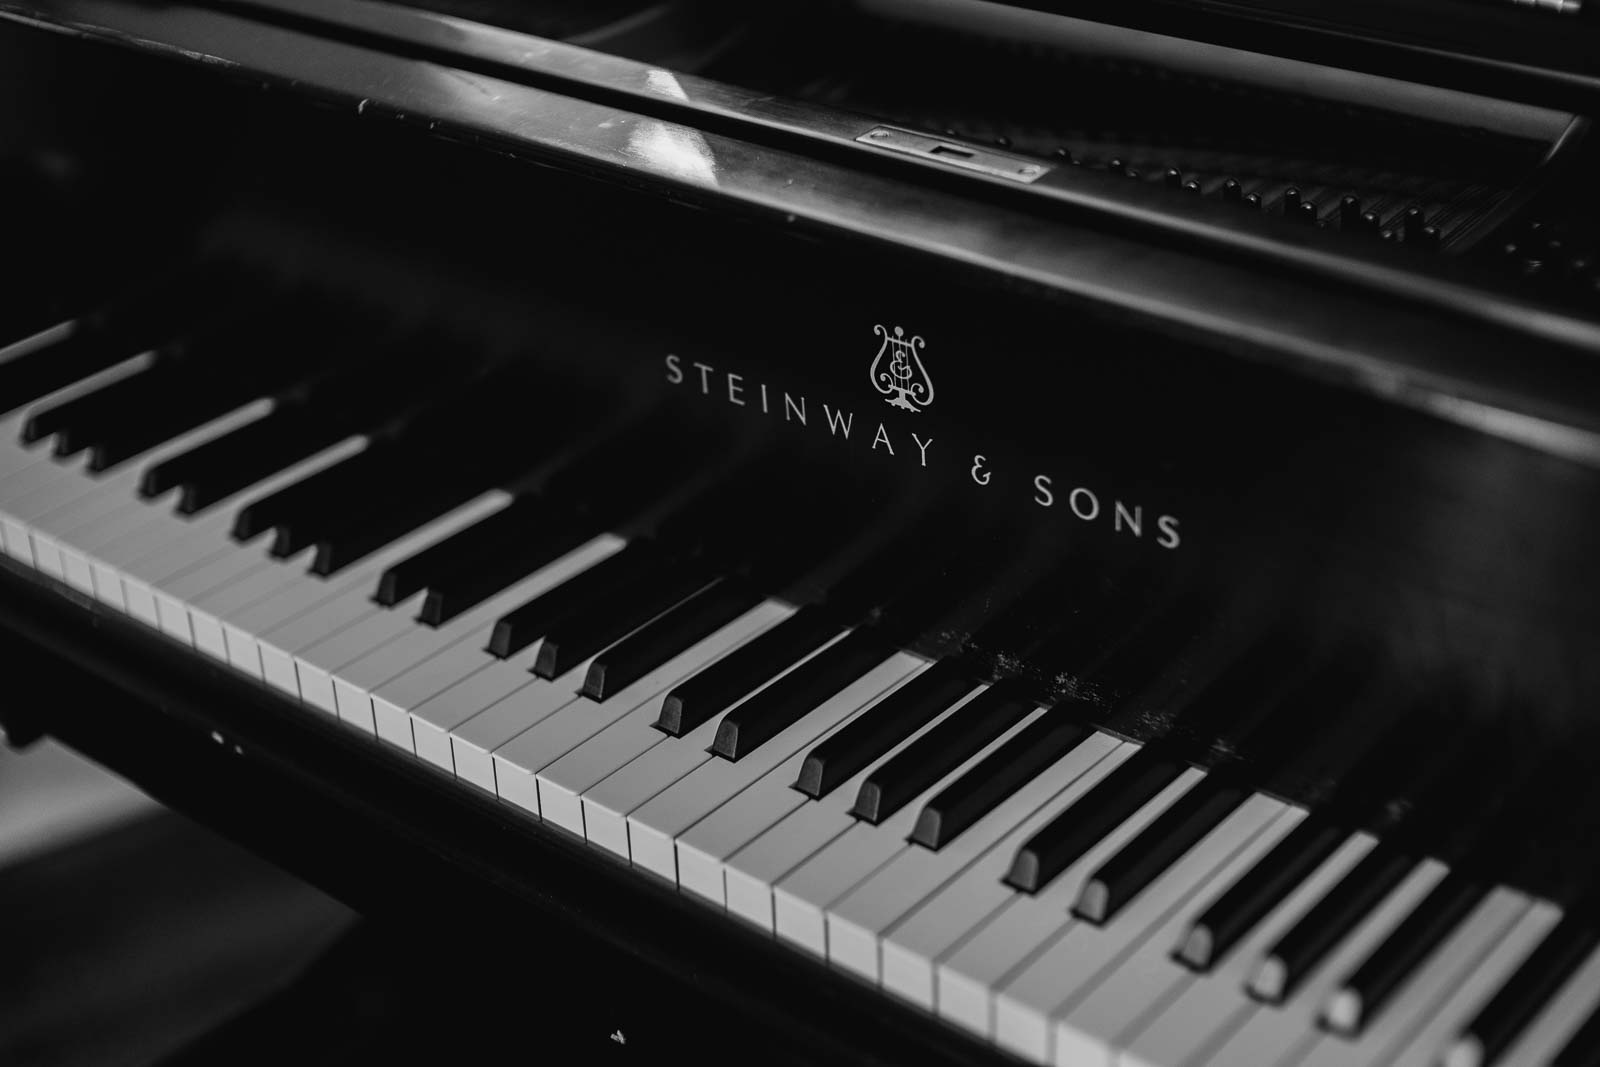 A gorgeous photo in black-and-white on the Steinway piano keyboard